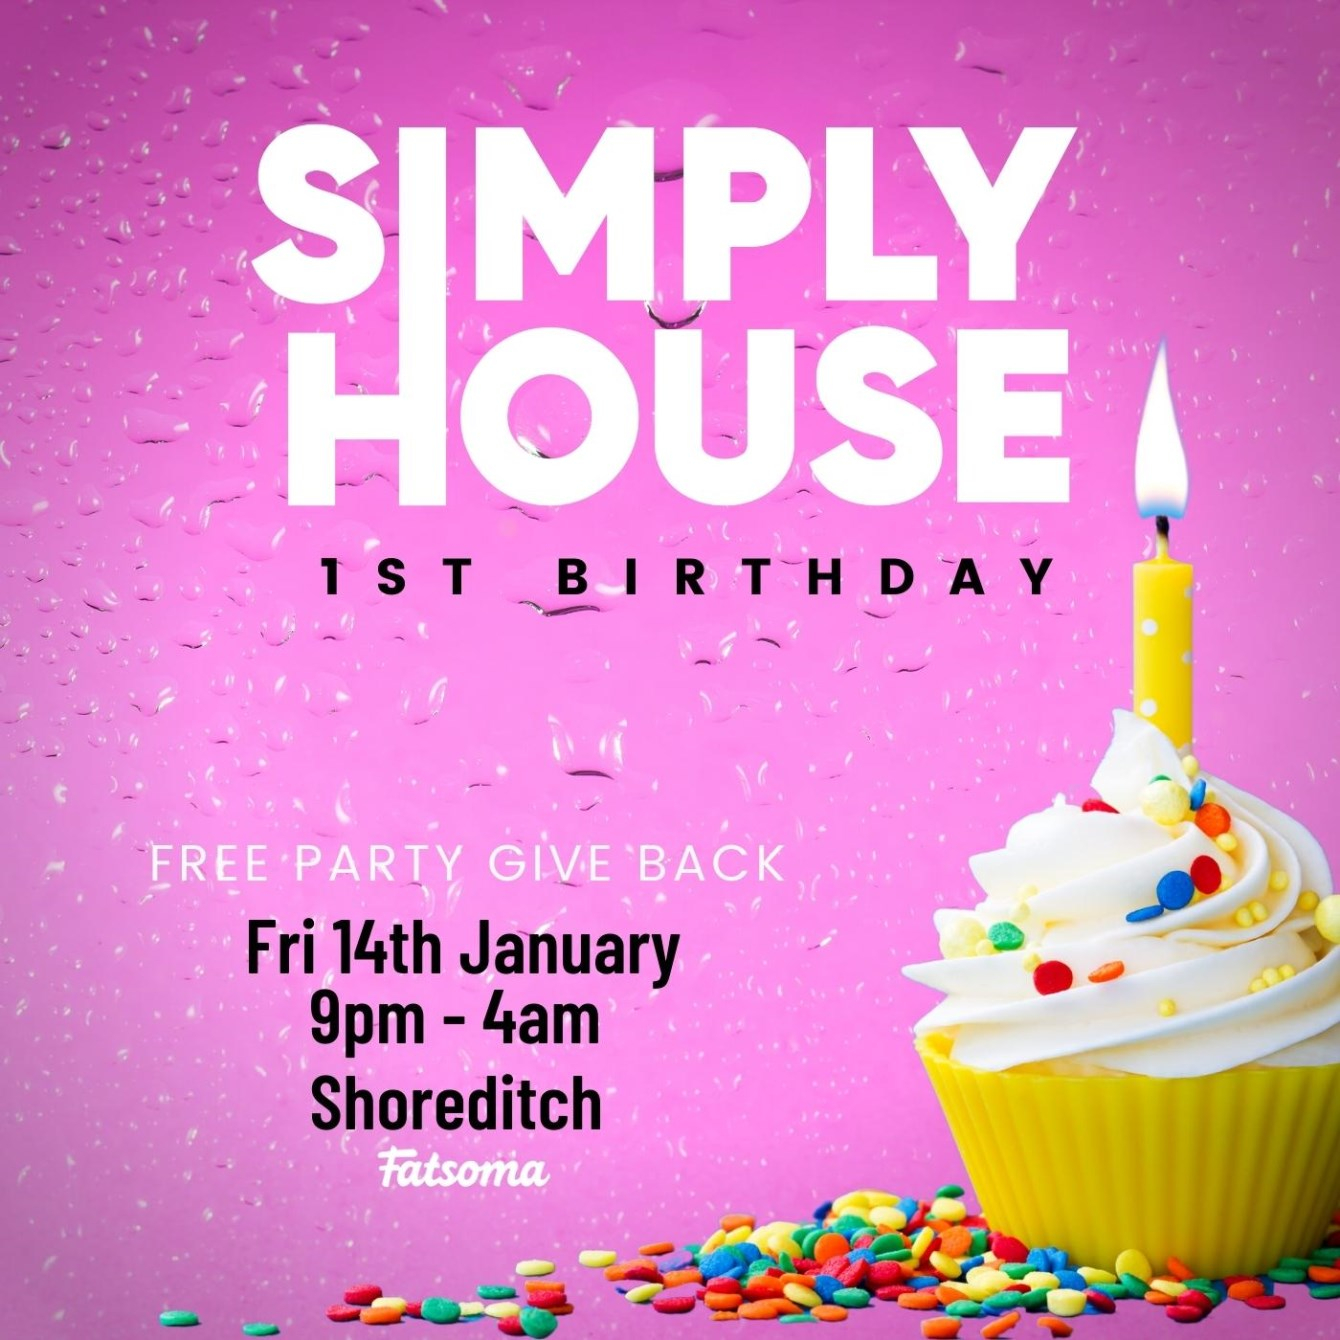 Simply House 1st Birthday - Flyer front